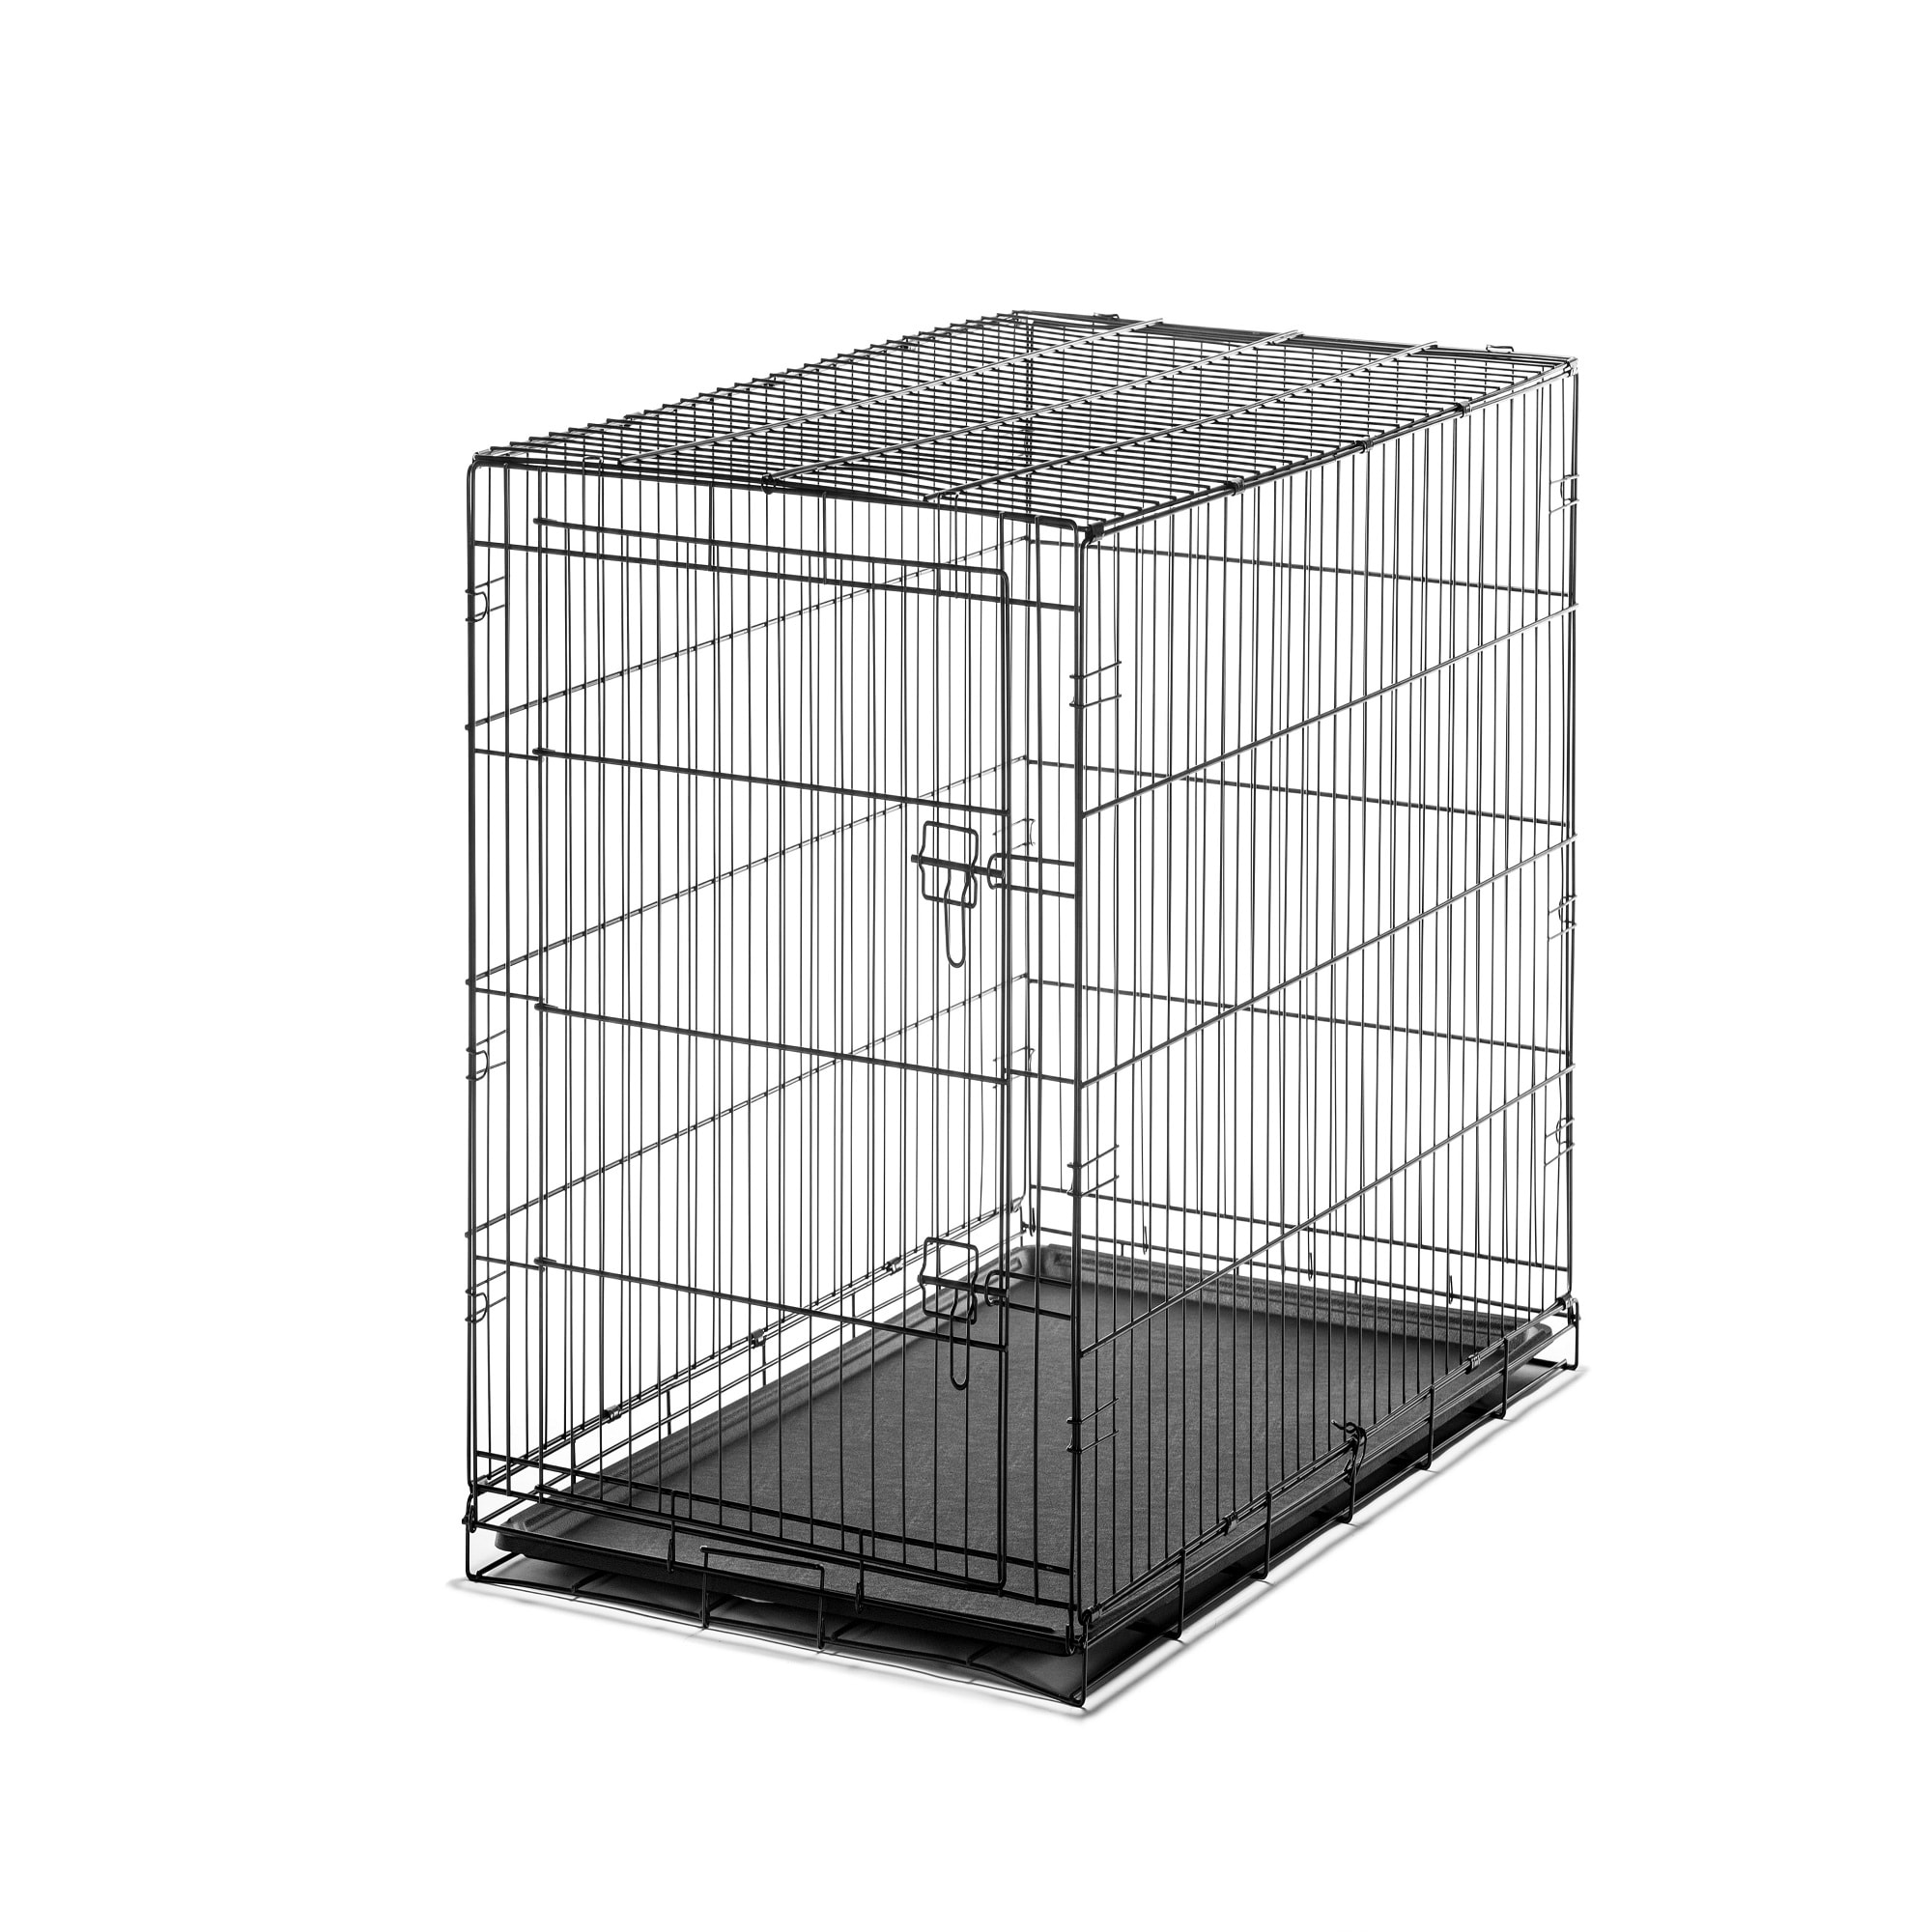 xl wire dog crate